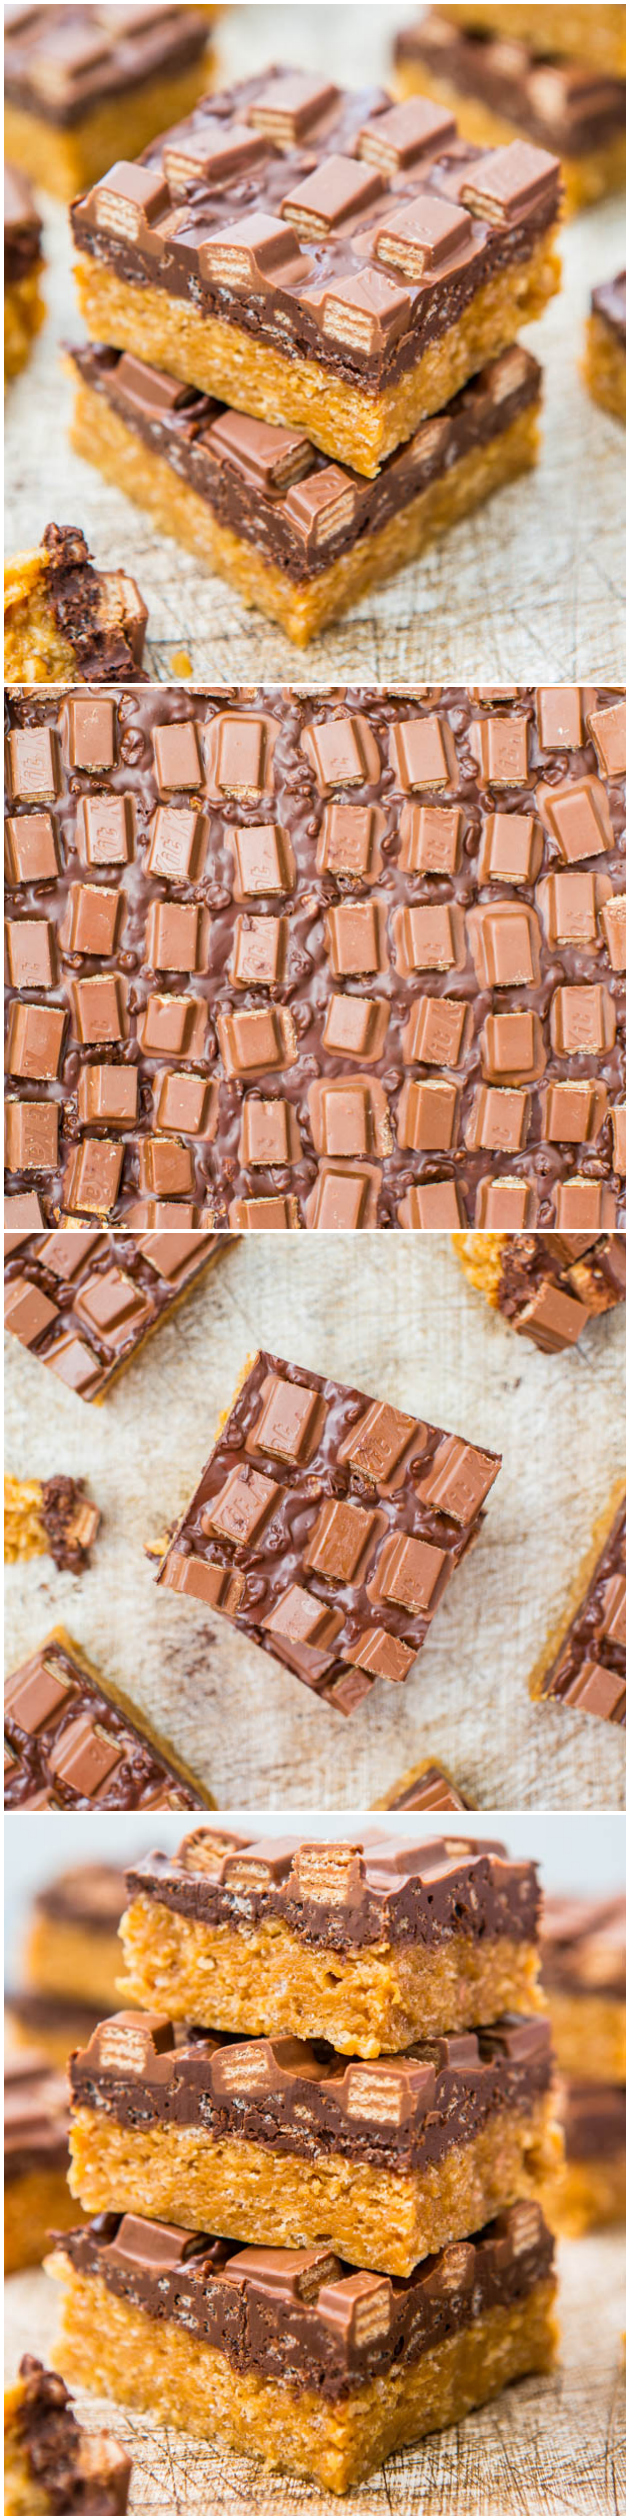 Chocolate Peanut Butter Kit Kat Crunch Bars - Easy, no-bake bars that are packed with peanut butter, chocolate & topped off with a wall of KitKats! At averiecooks.com